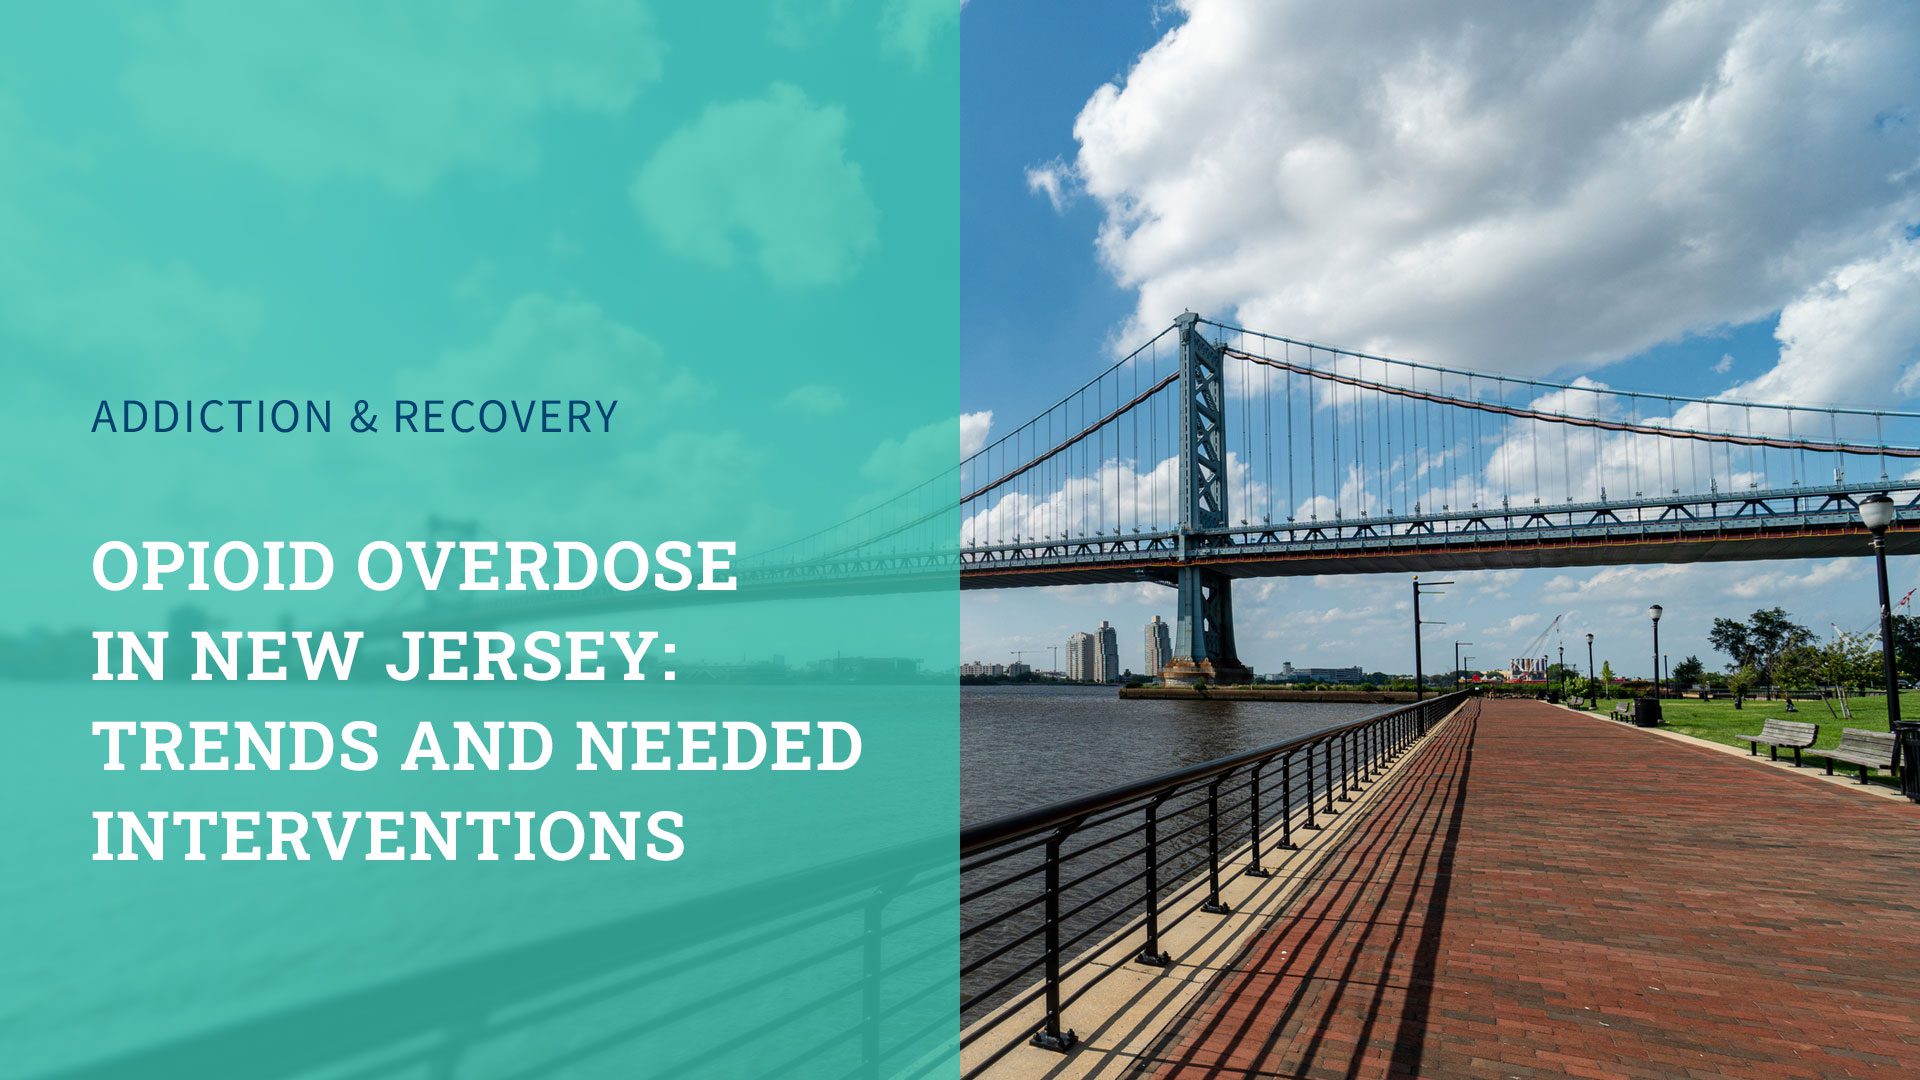 Opioid Overdose in New Jersey: Trends and Needed Interventions